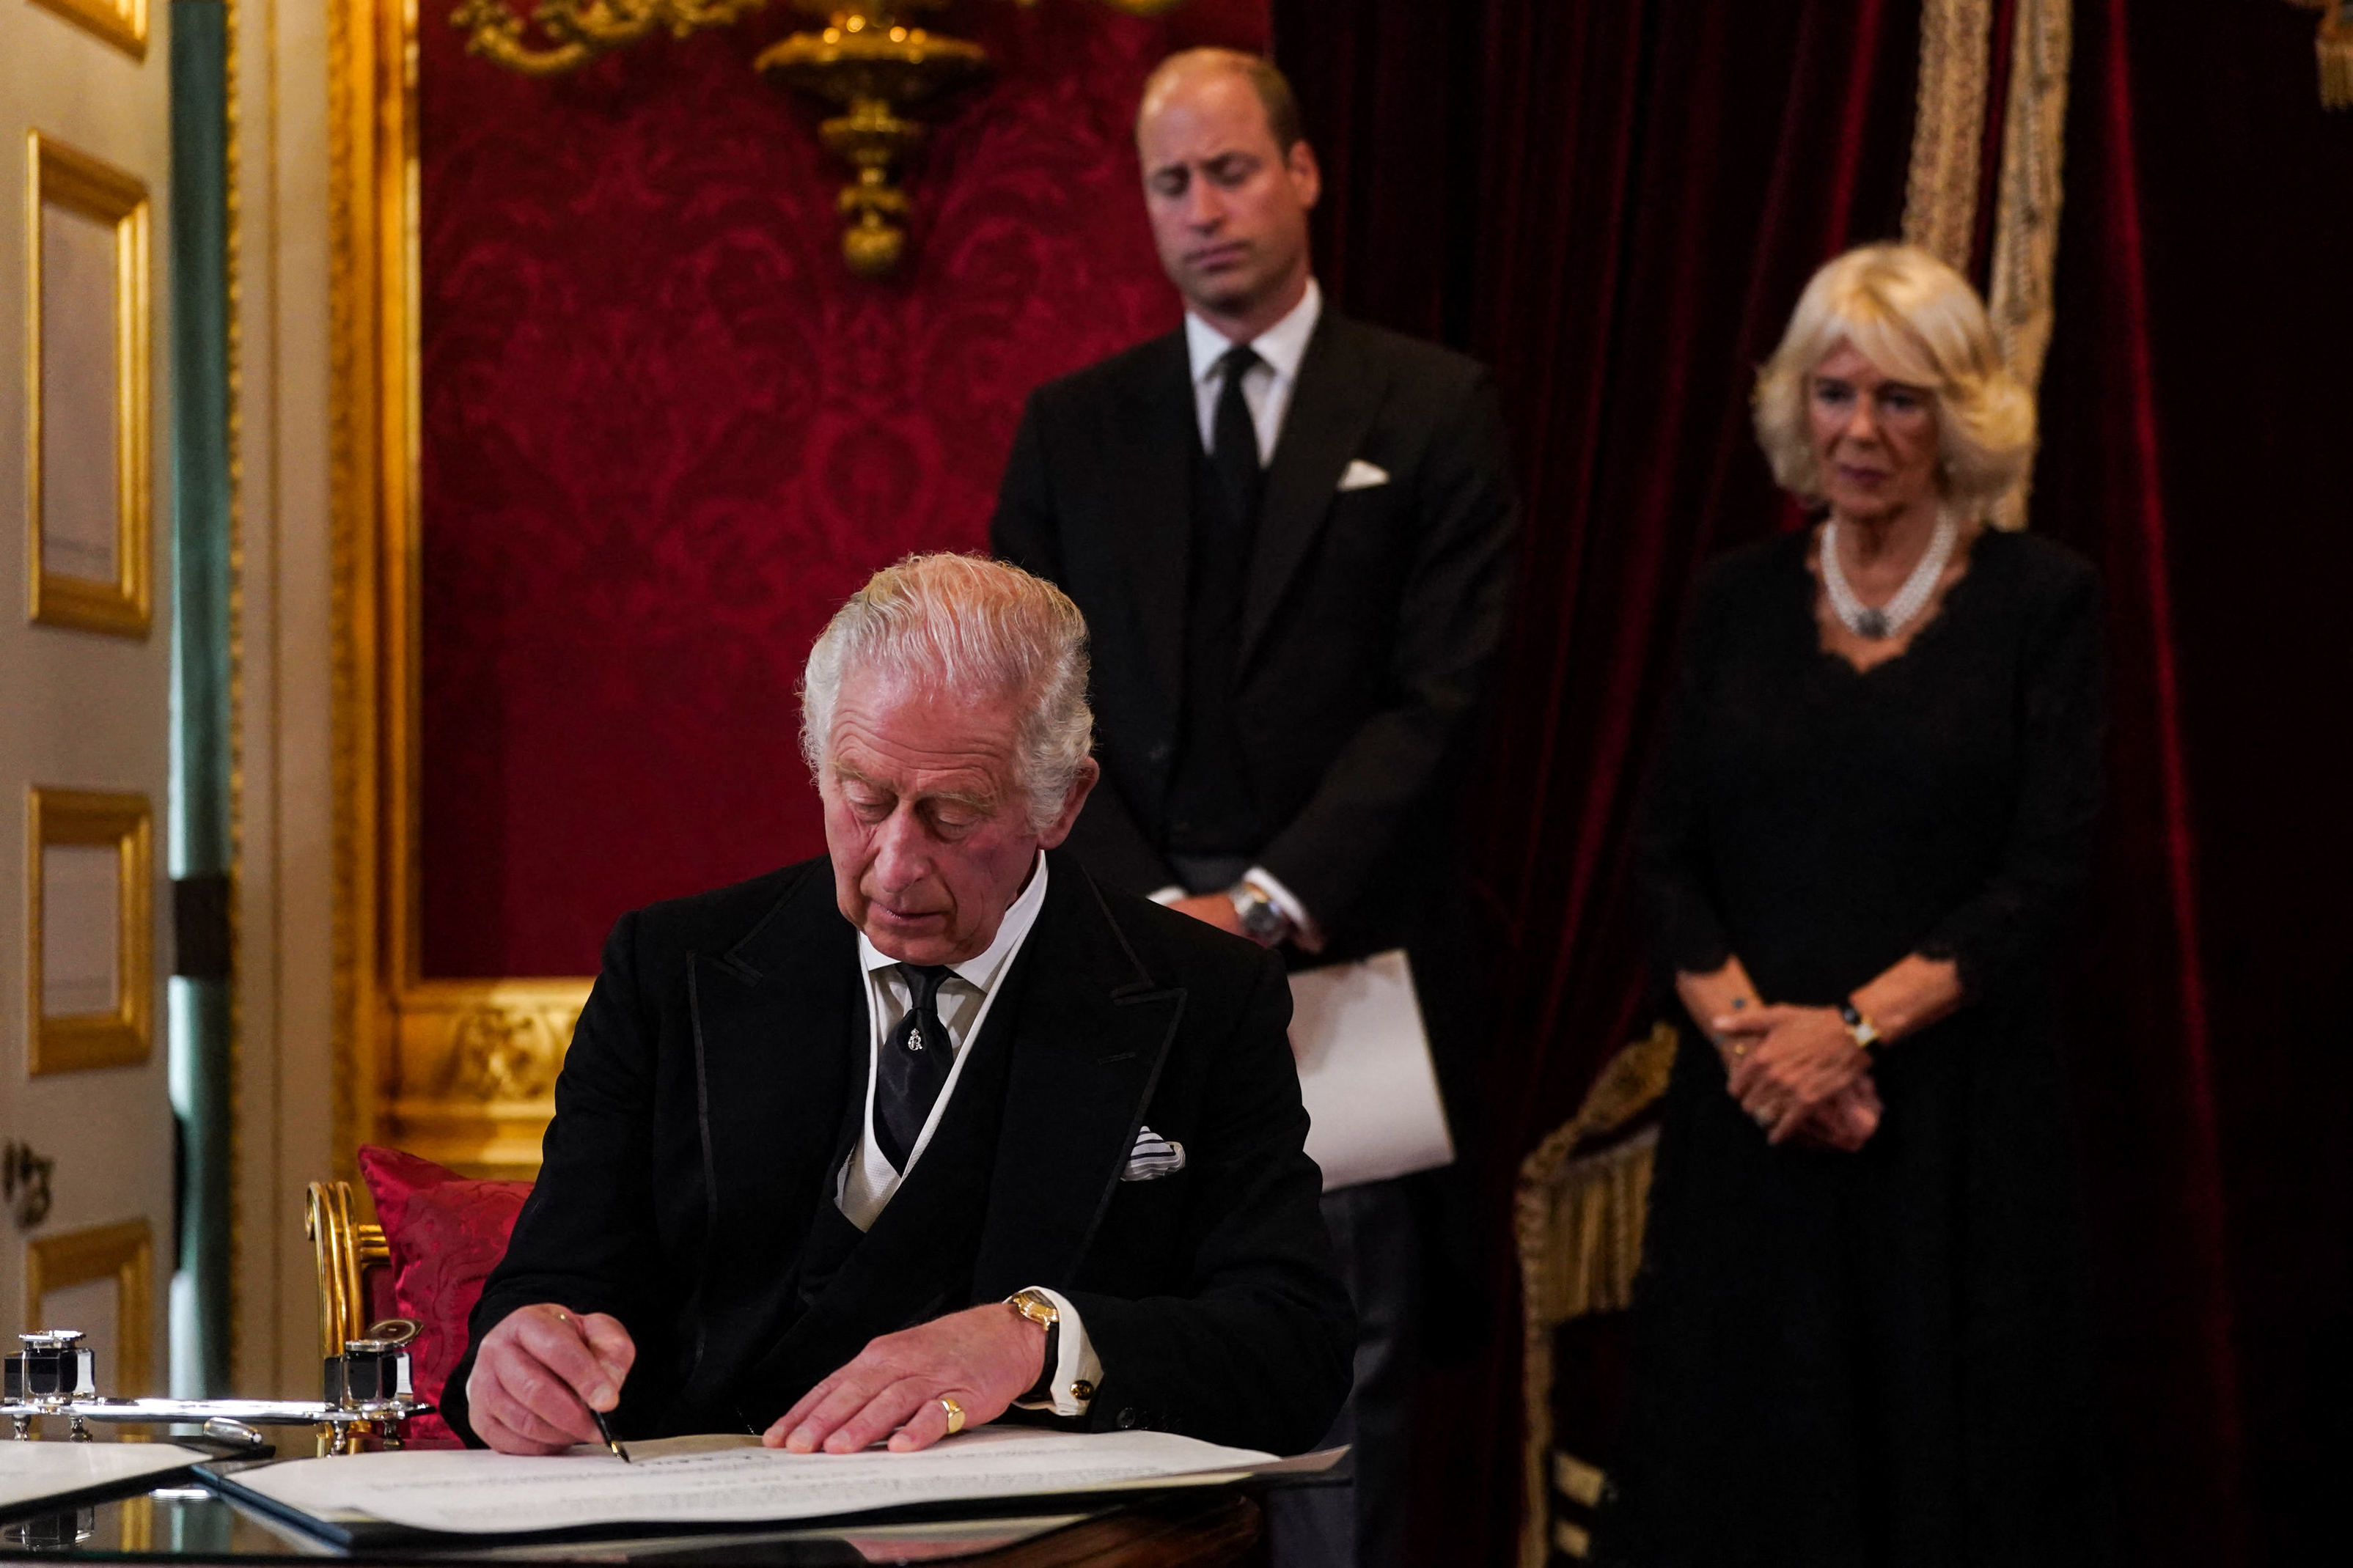 <p>A newly titled <a href="https://www.wonderwall.com/celebrity/profiles/overview/prince-william-482.article">Prince William</a>, who's now the Prince of Wales, and Camilla, Queen Consort watched as Britain's new King Charles III signed an oath to uphold the security of the Church in Scotland during a meeting of the Accession Council inside St. James's Palace in London on Sept. 10, 2022, to proclaim him as the new sovereign. He now signs his documents "Charles R," with the R standing for Rex, which means king in Latin.</p>